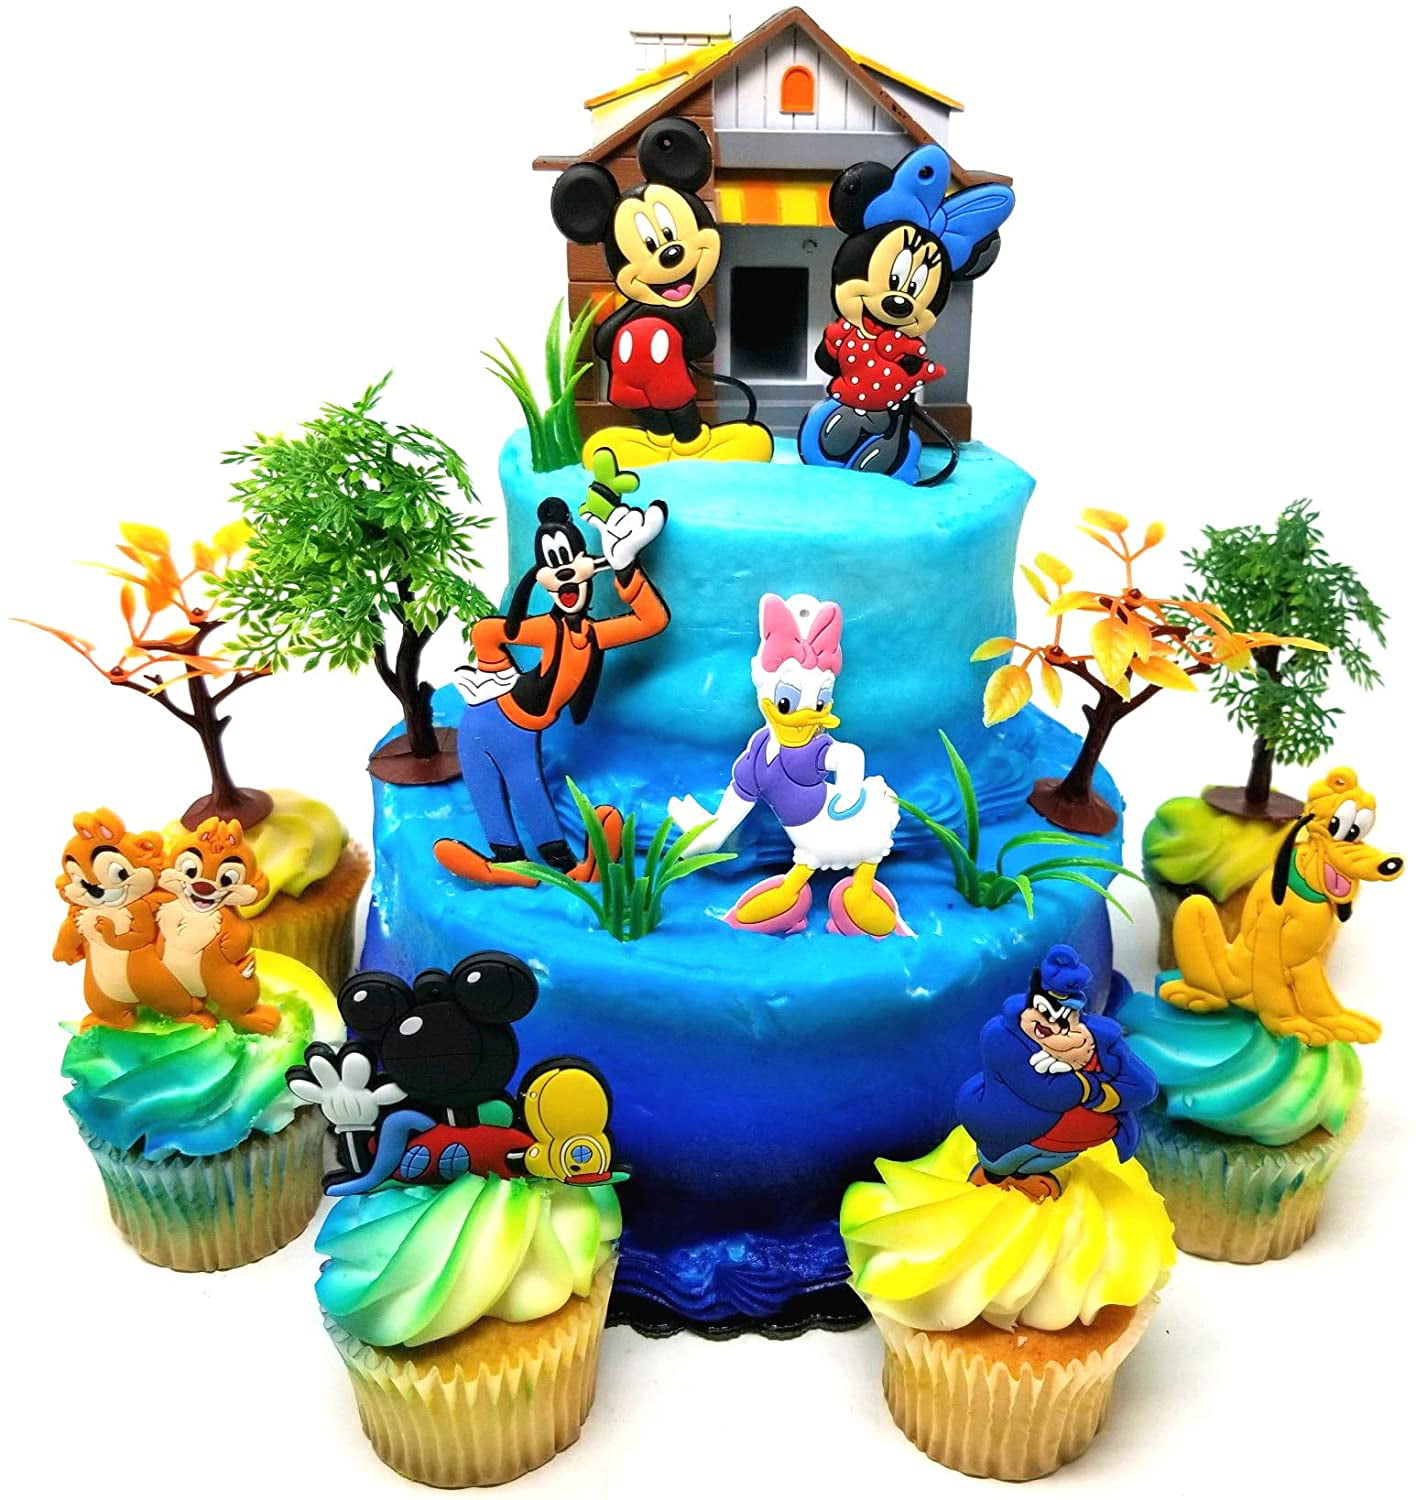 NEW---BUMPER SET--- 4 x MICKEY MOUSE & FRIENDS Birthday Card Making Toppers